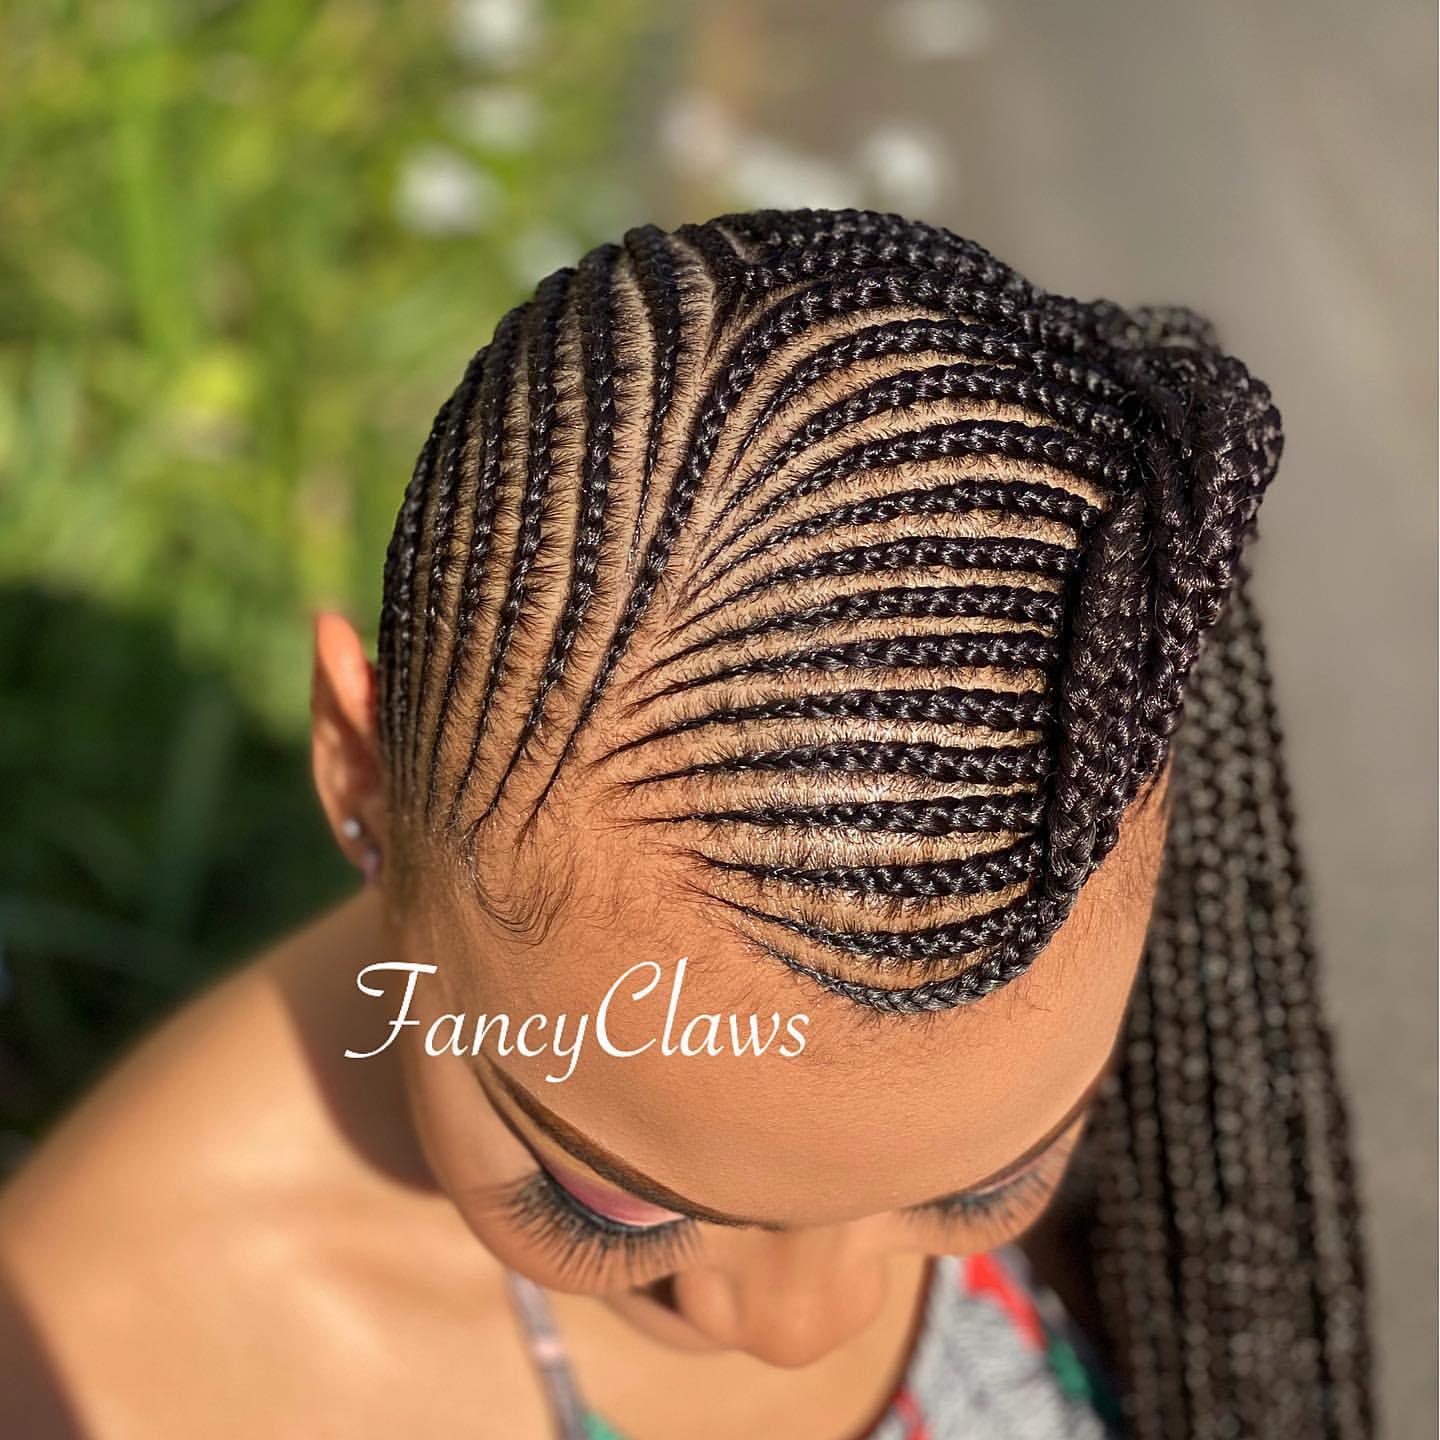 Different Braided Hairstyles For This Season//Ghana Weaven.